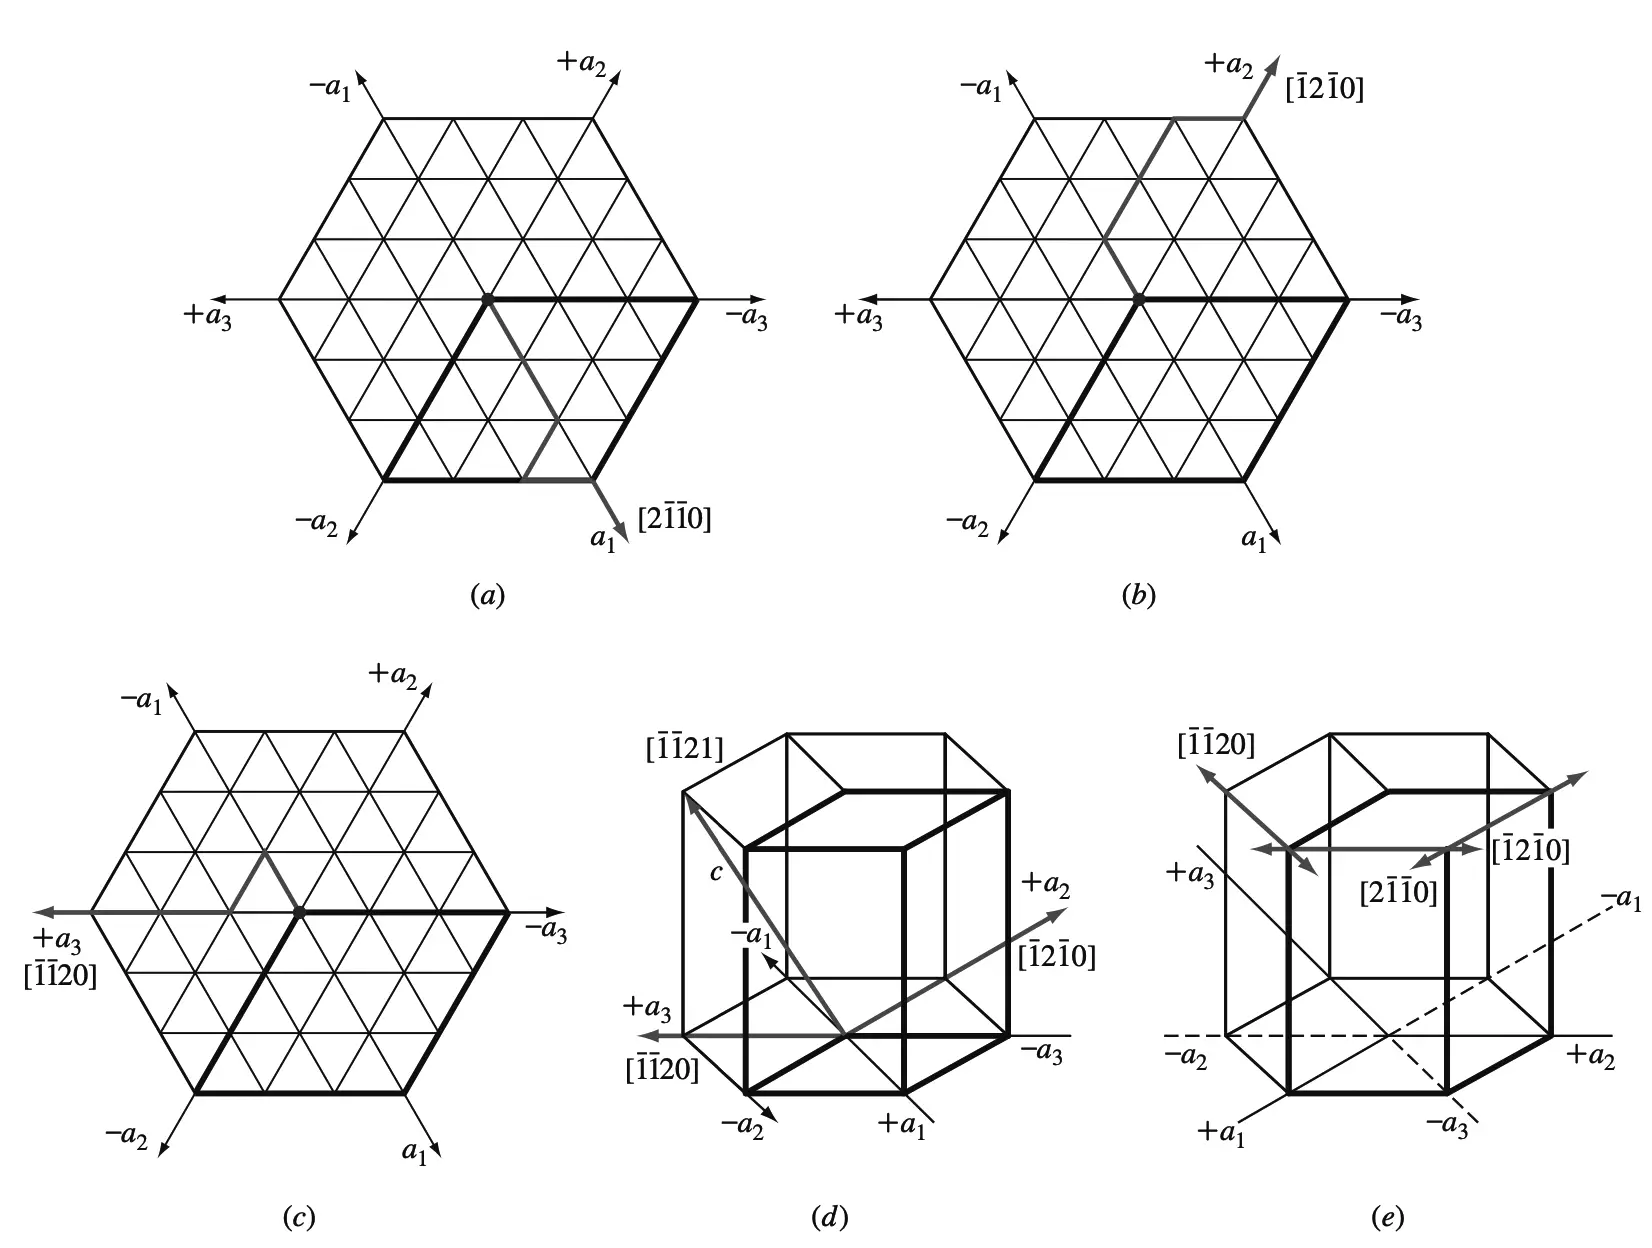 Miller-Bravais hexagonal crystal structure direction indices for principal directions